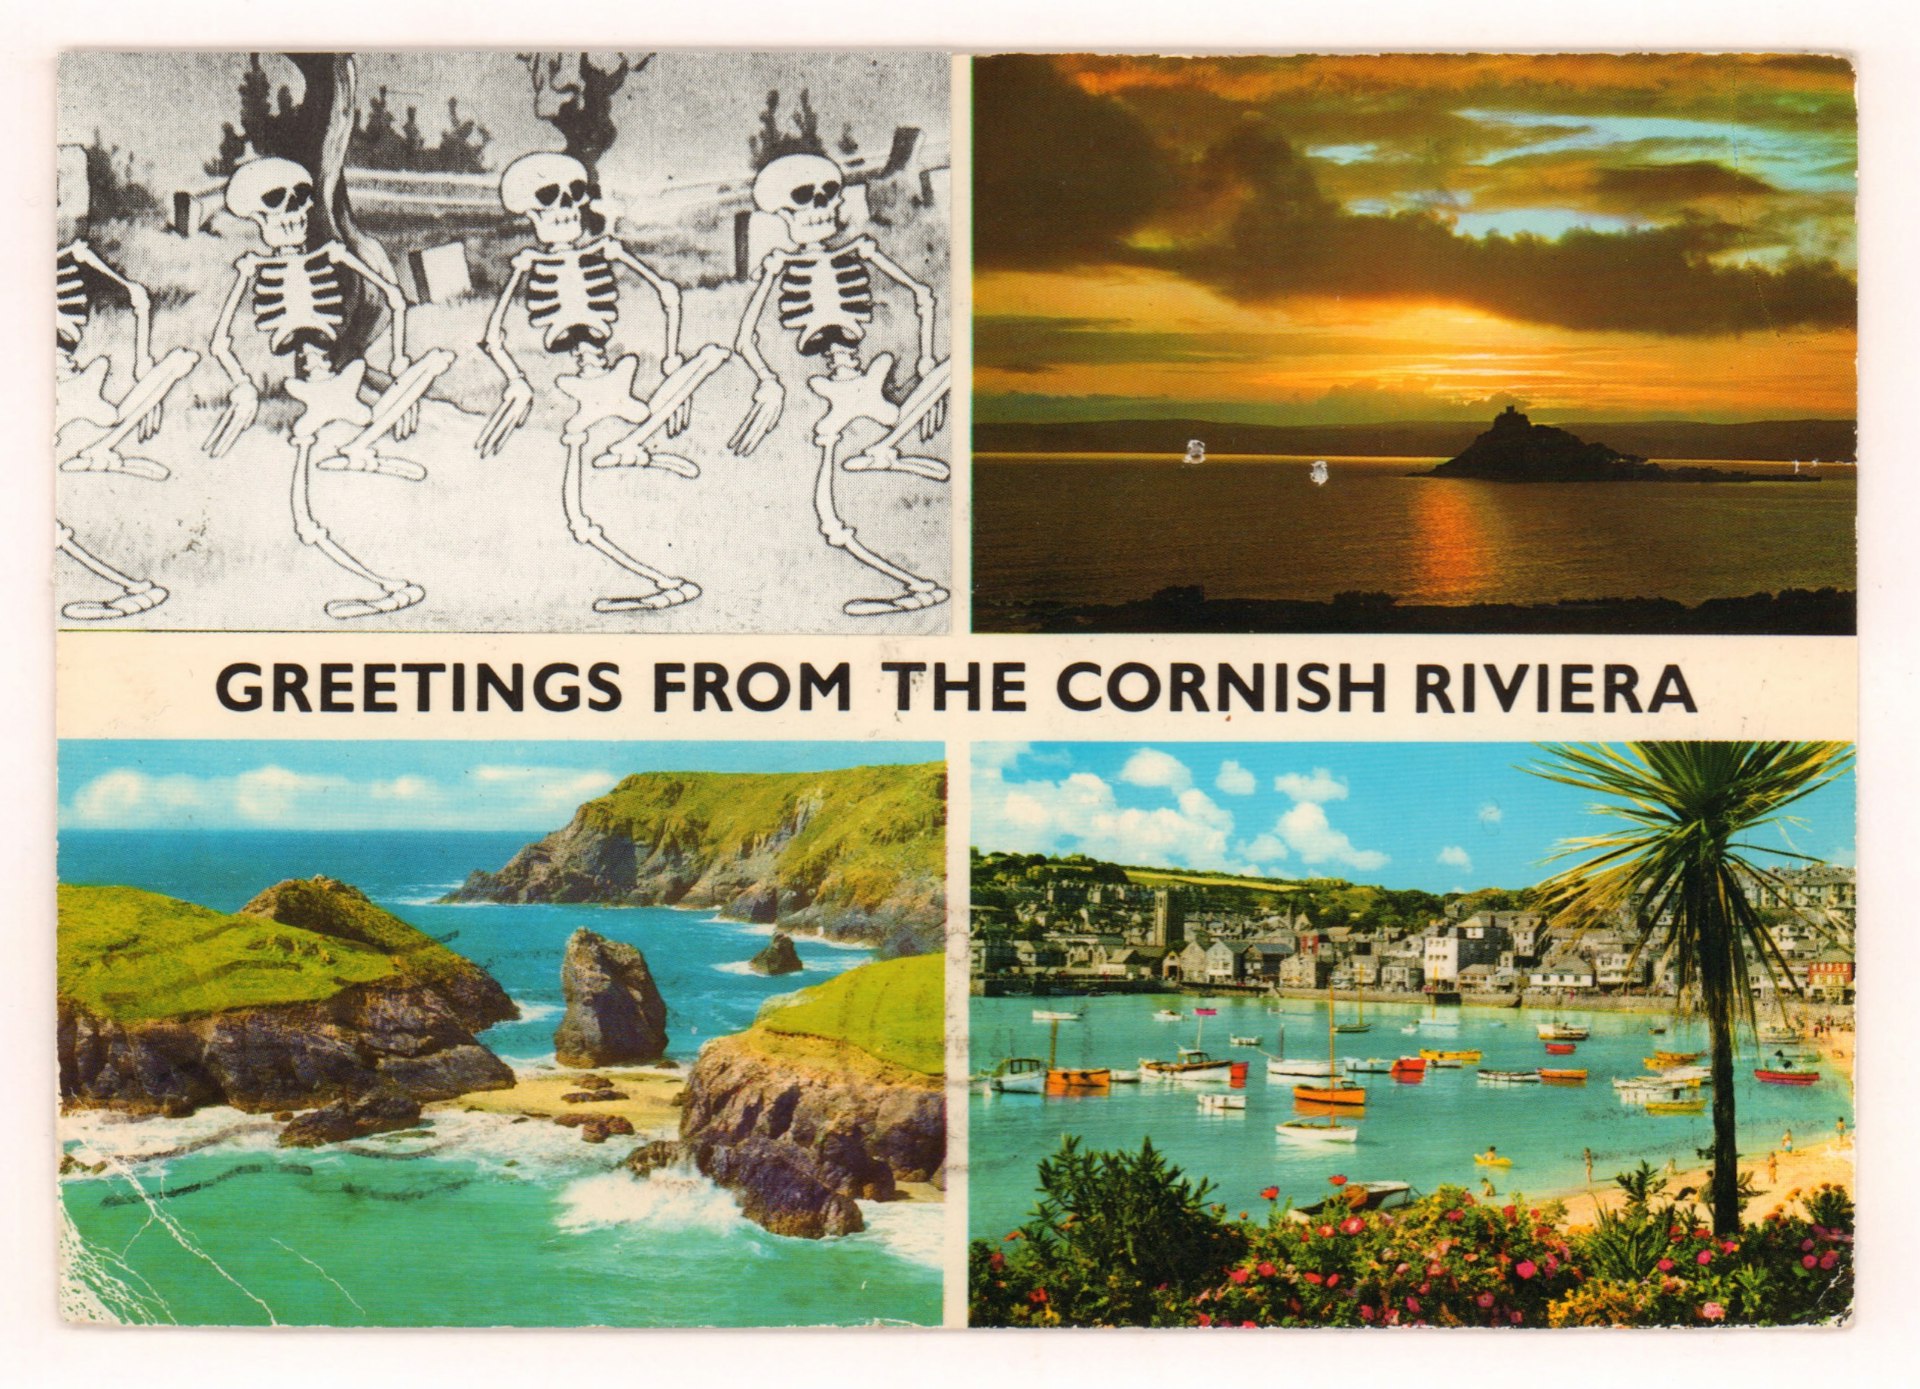 Greetings From the Cornish Riviera